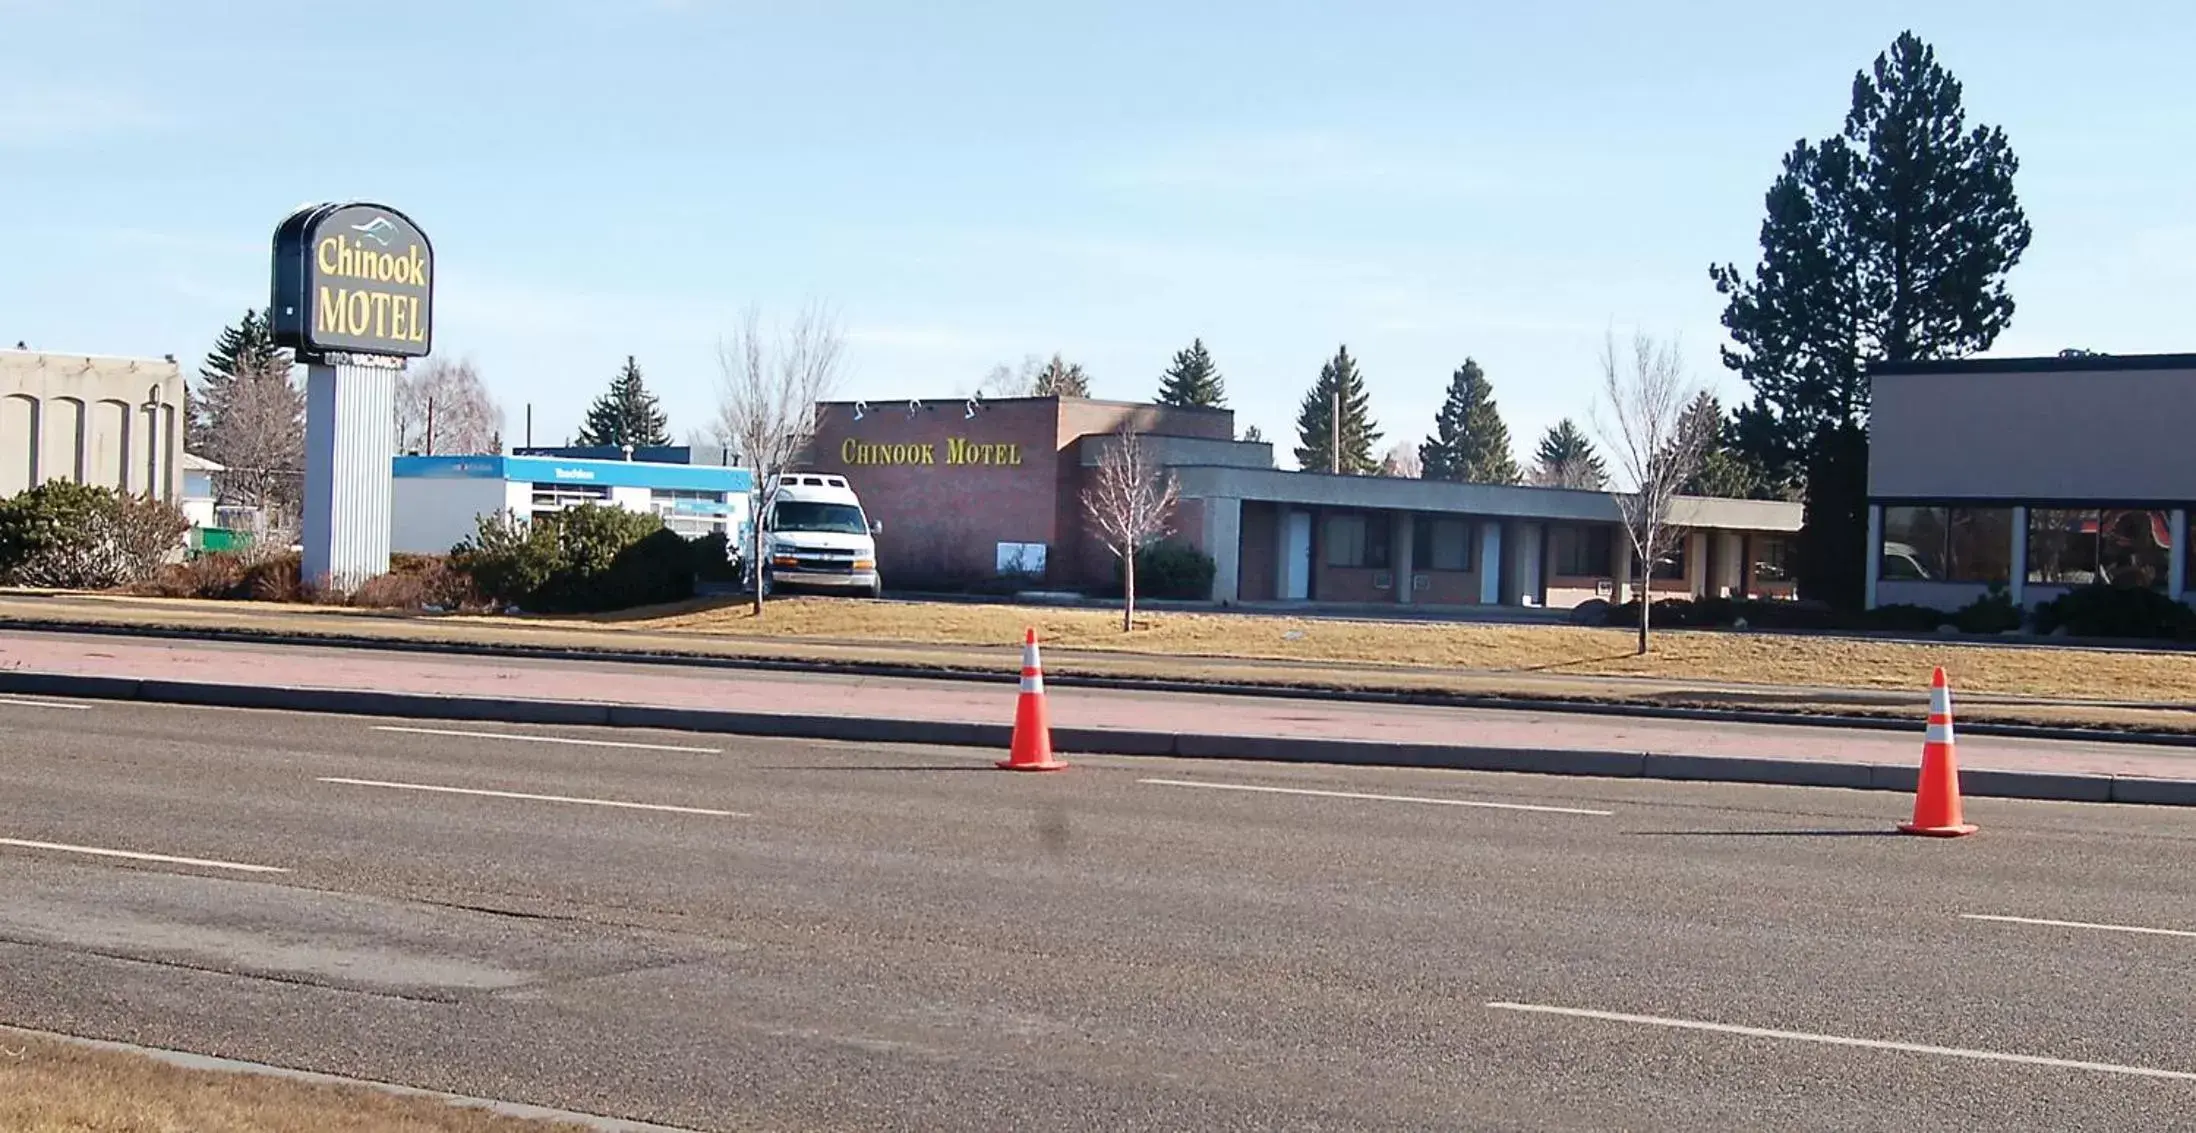 Property Building in Chinook Motel